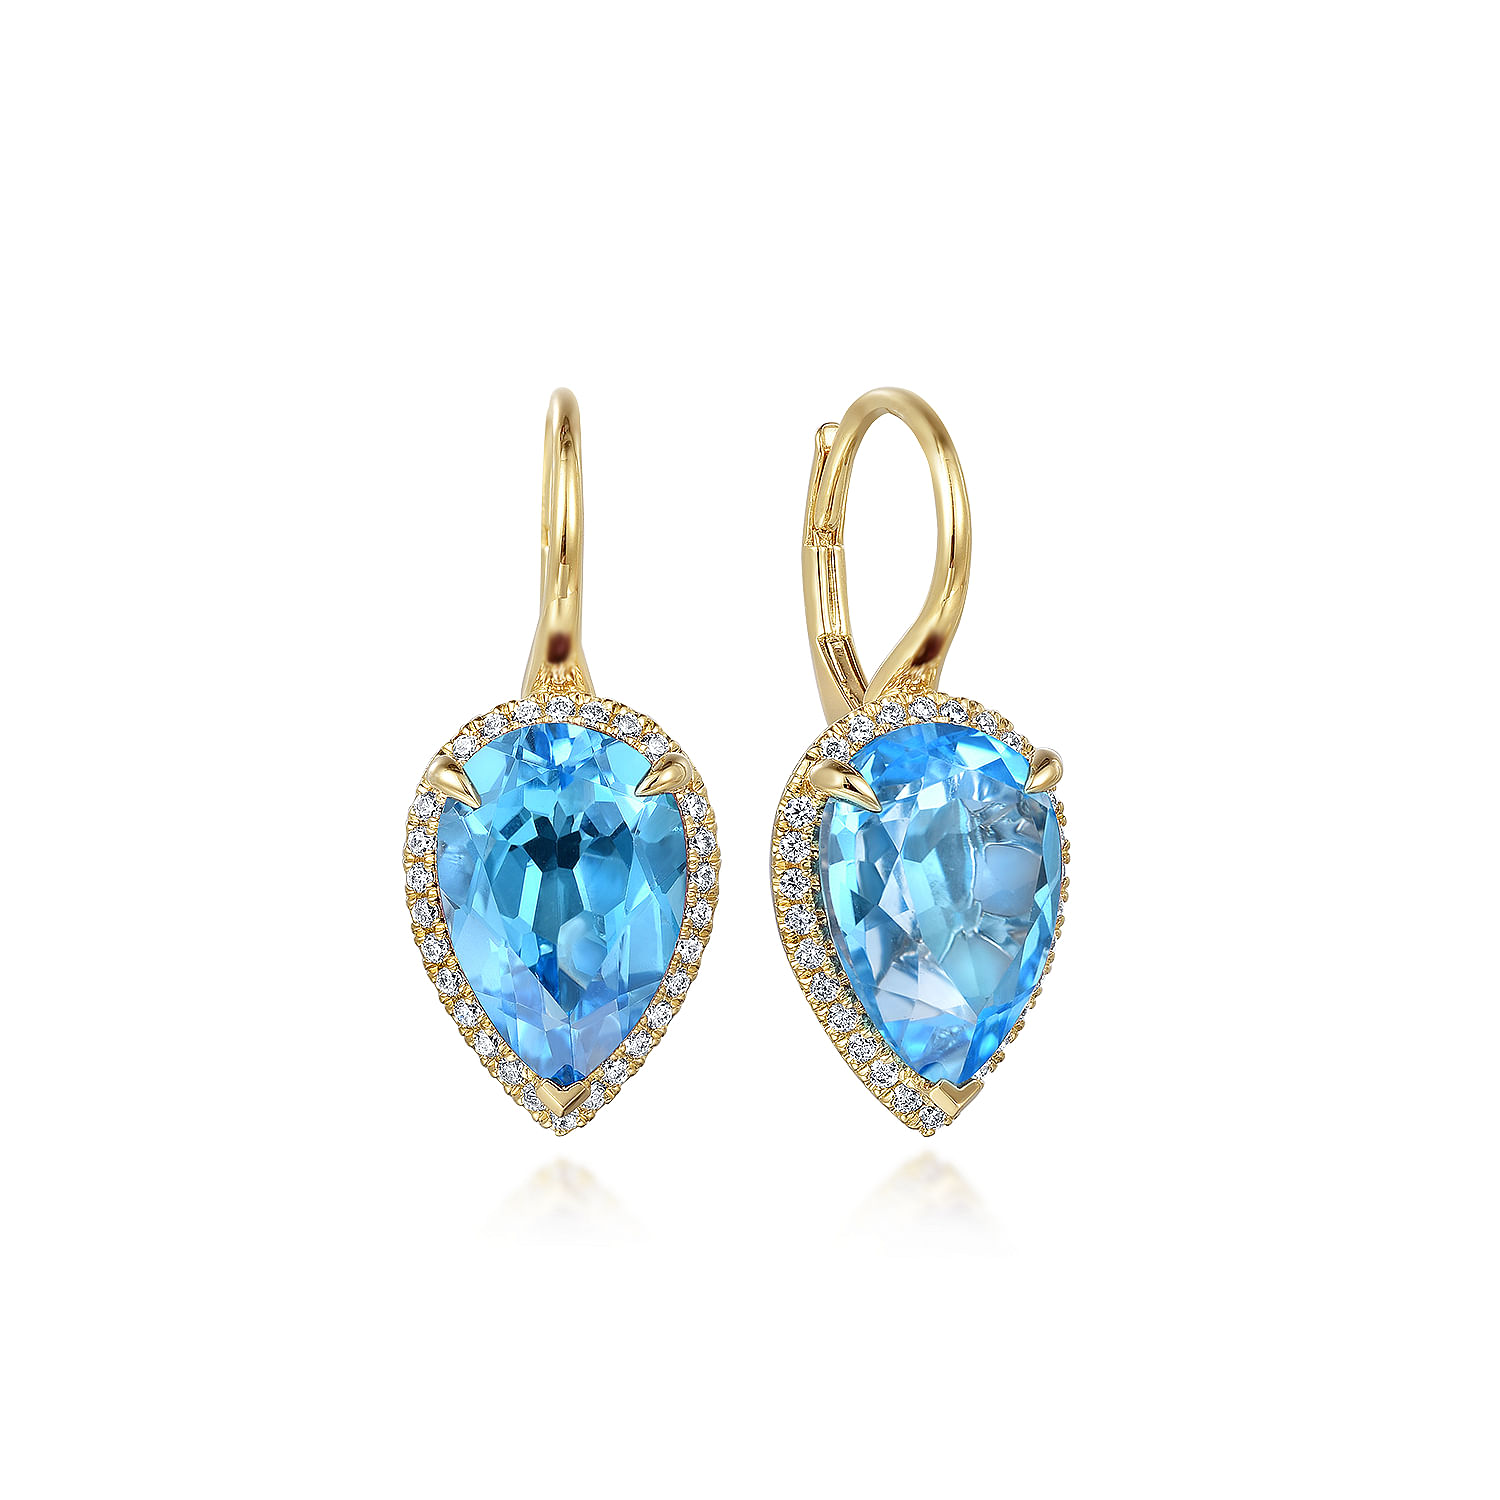 14K Yellow Gold Diamond and Flat Pear Blue Topaz Earrings With Flower Pattern J-Back